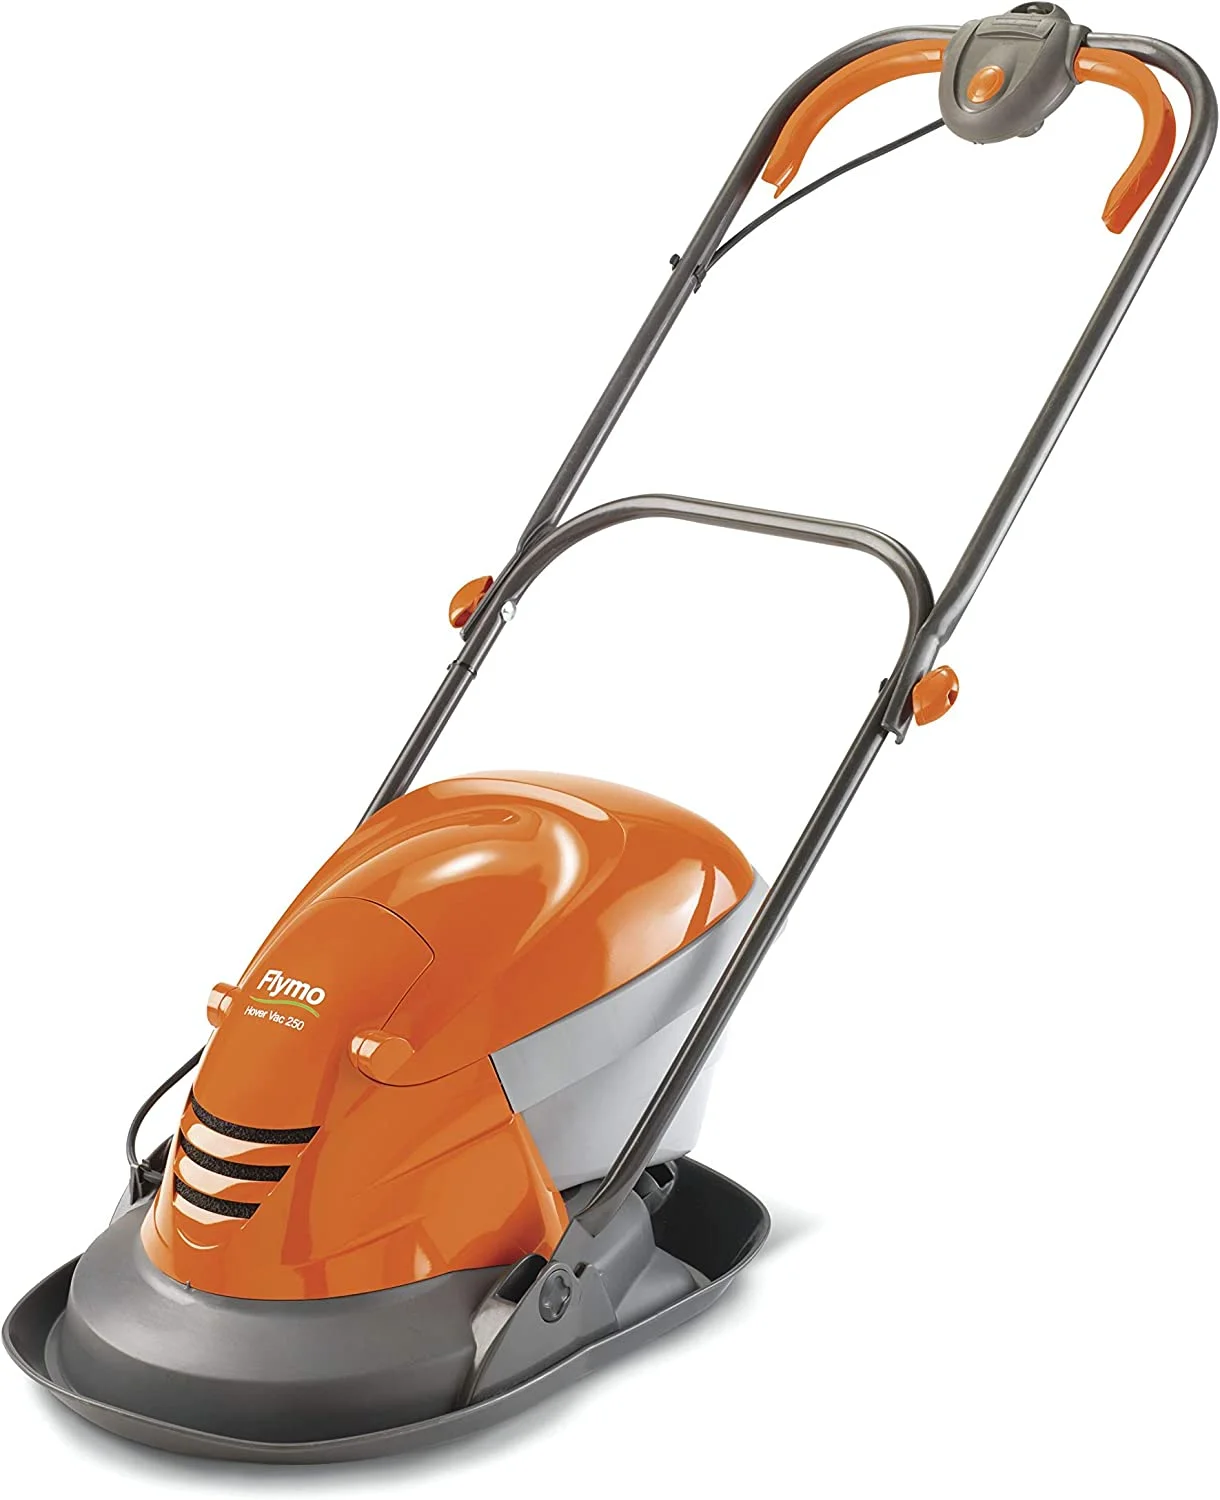 Image of Flymo Hover Vac 250 Hover Lawn Mower